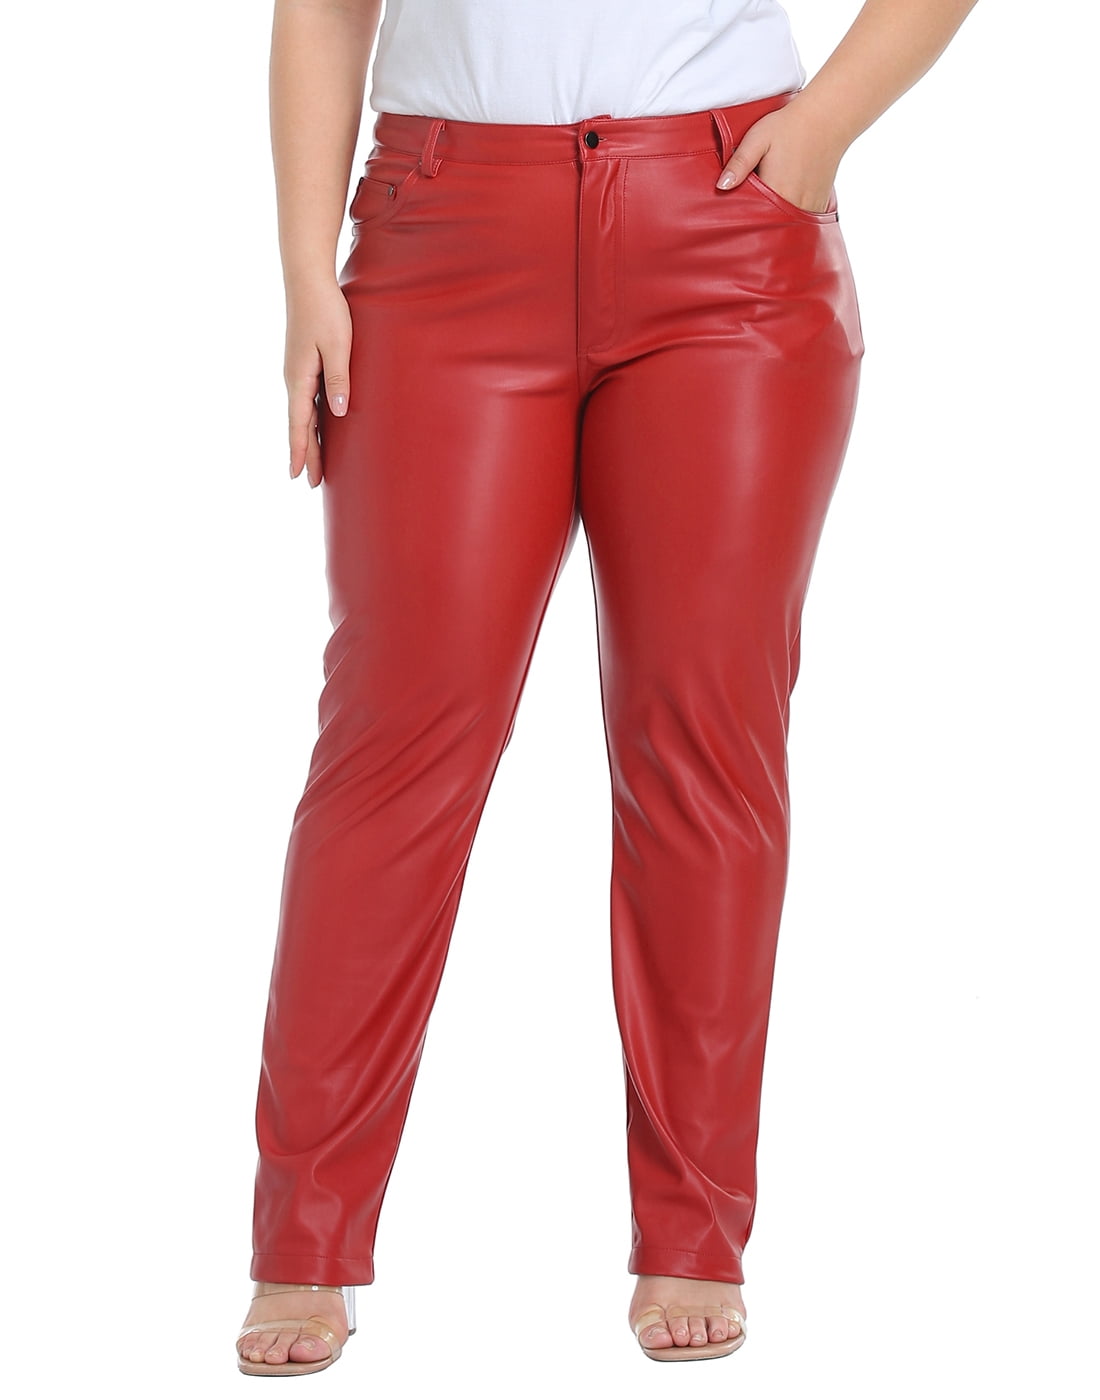 HDE Women's Plus Size High Waisted Faux Leather Pants with Pockets Red 2X 